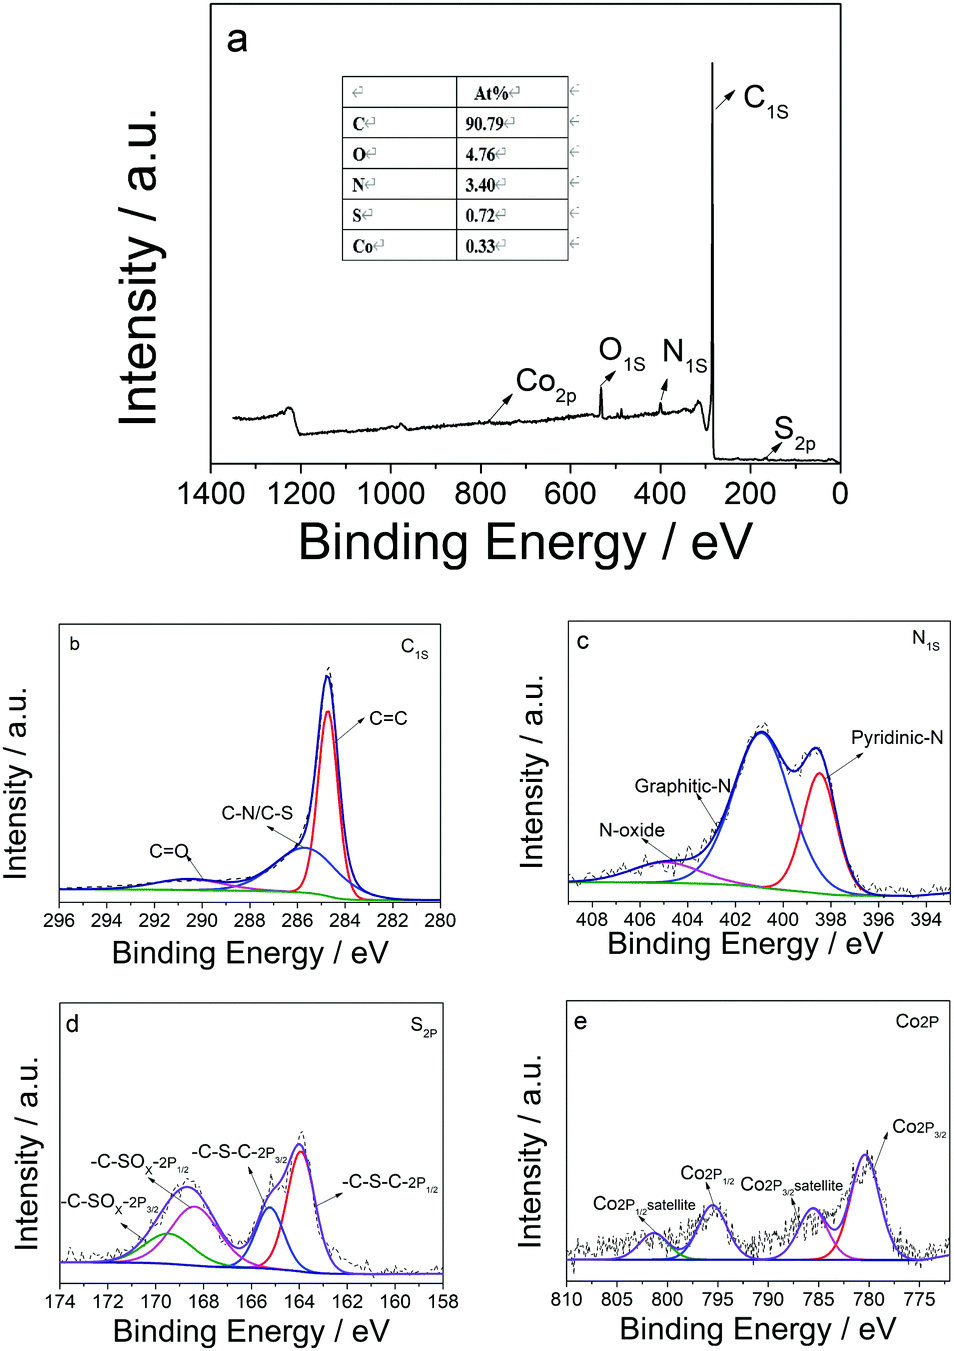 A Highly Efficient Bifunctional Electrocatalyst Orr Oer Derived From Go Functionalized With Carbonyl Hydroxyl And Epoxy Groups For Rechargeable Zin New Journal Of Chemistry Rsc Publishing Doi 10 1039 D1nj007d